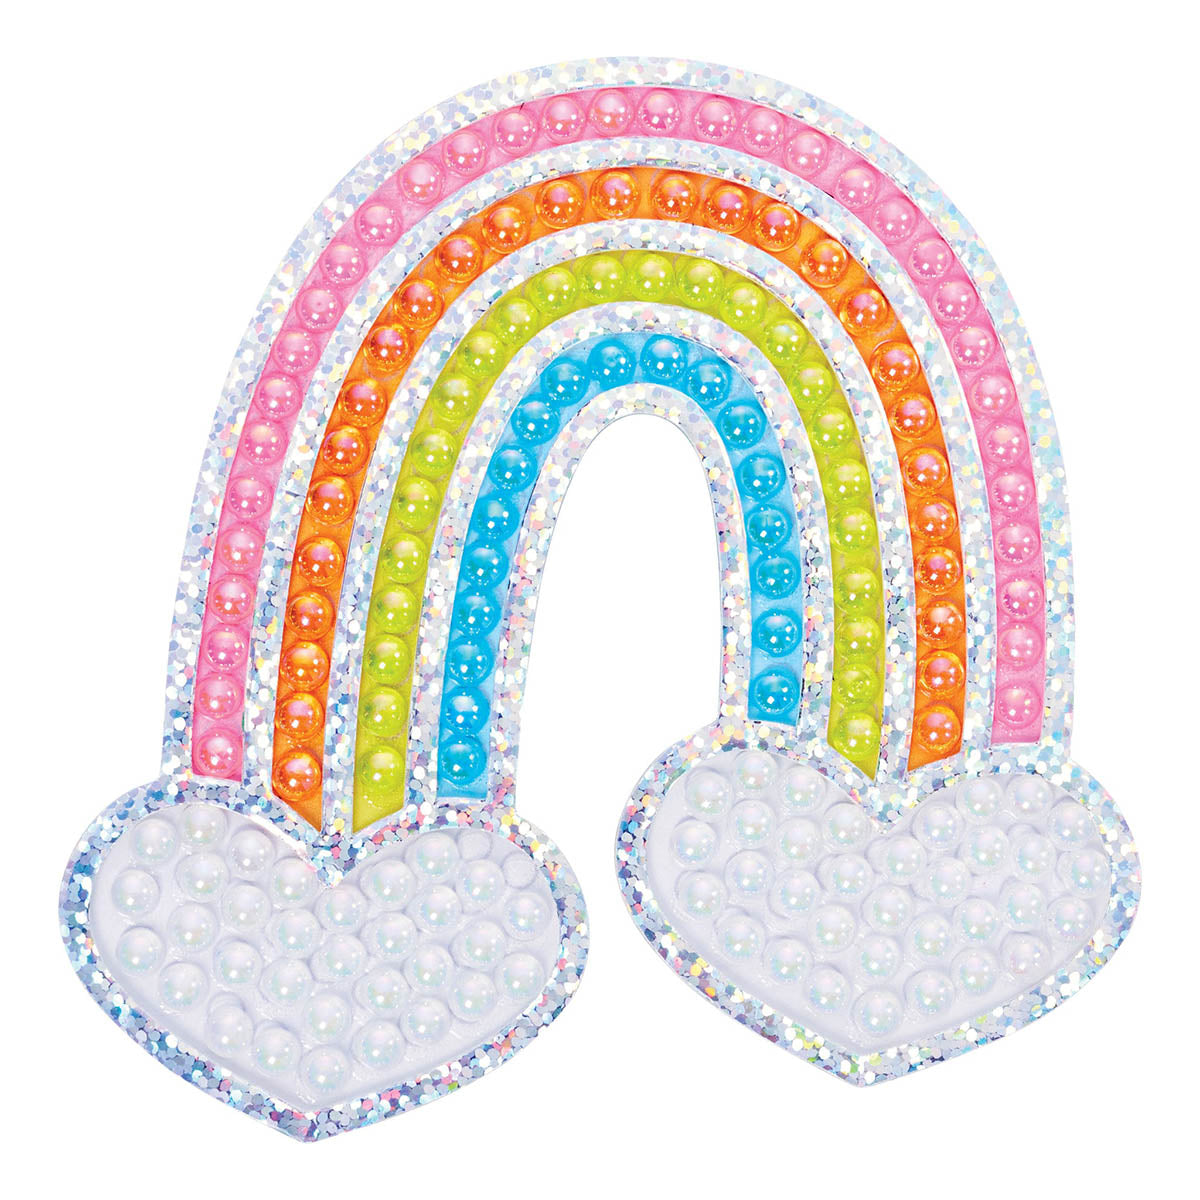 Finished Rainbow Bubble Gems Super Sticker by Creativity for Kids.